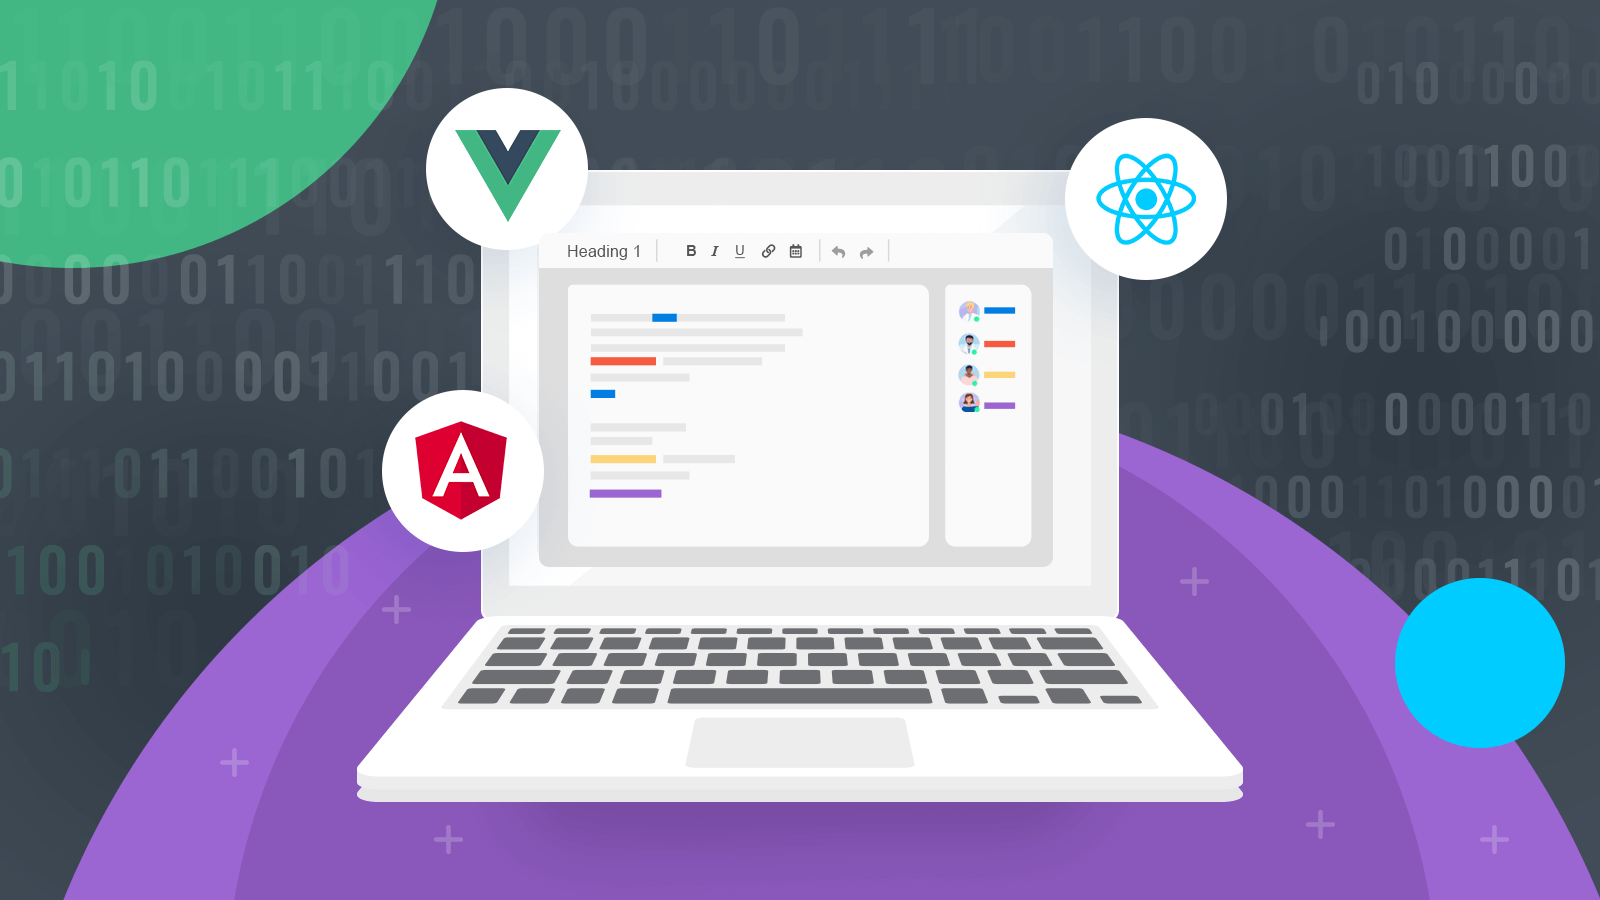 Computer in the center. Vue, Angular and React icons floating near the mentioned laptop